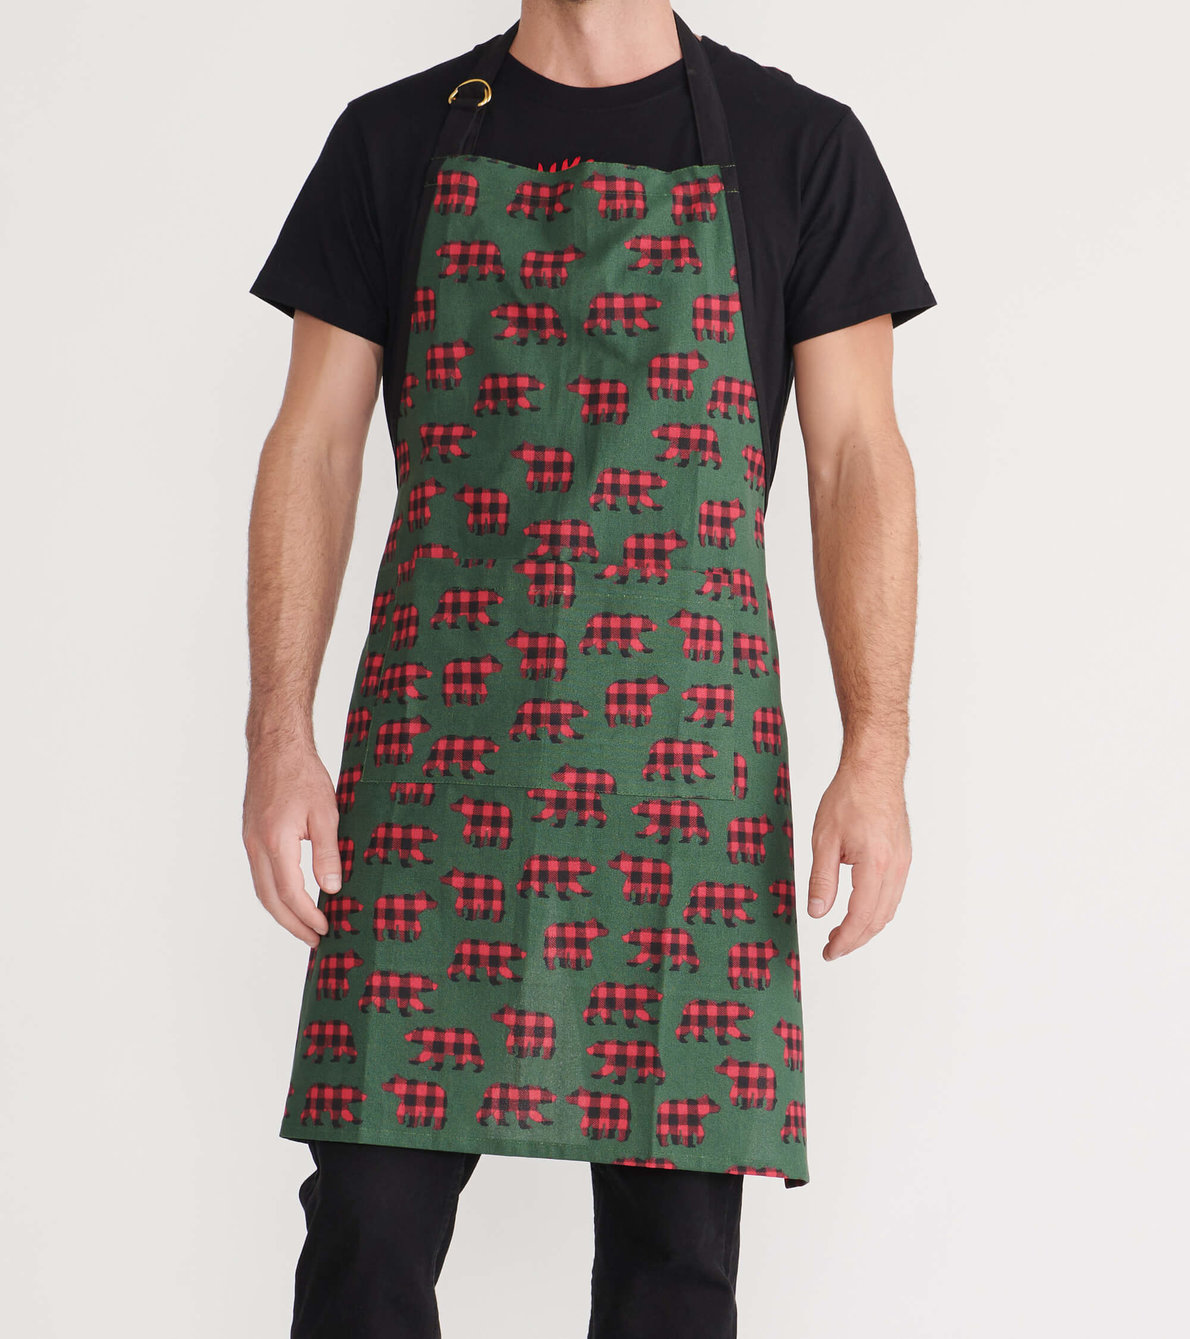 View larger image of Plaid Bears Apron